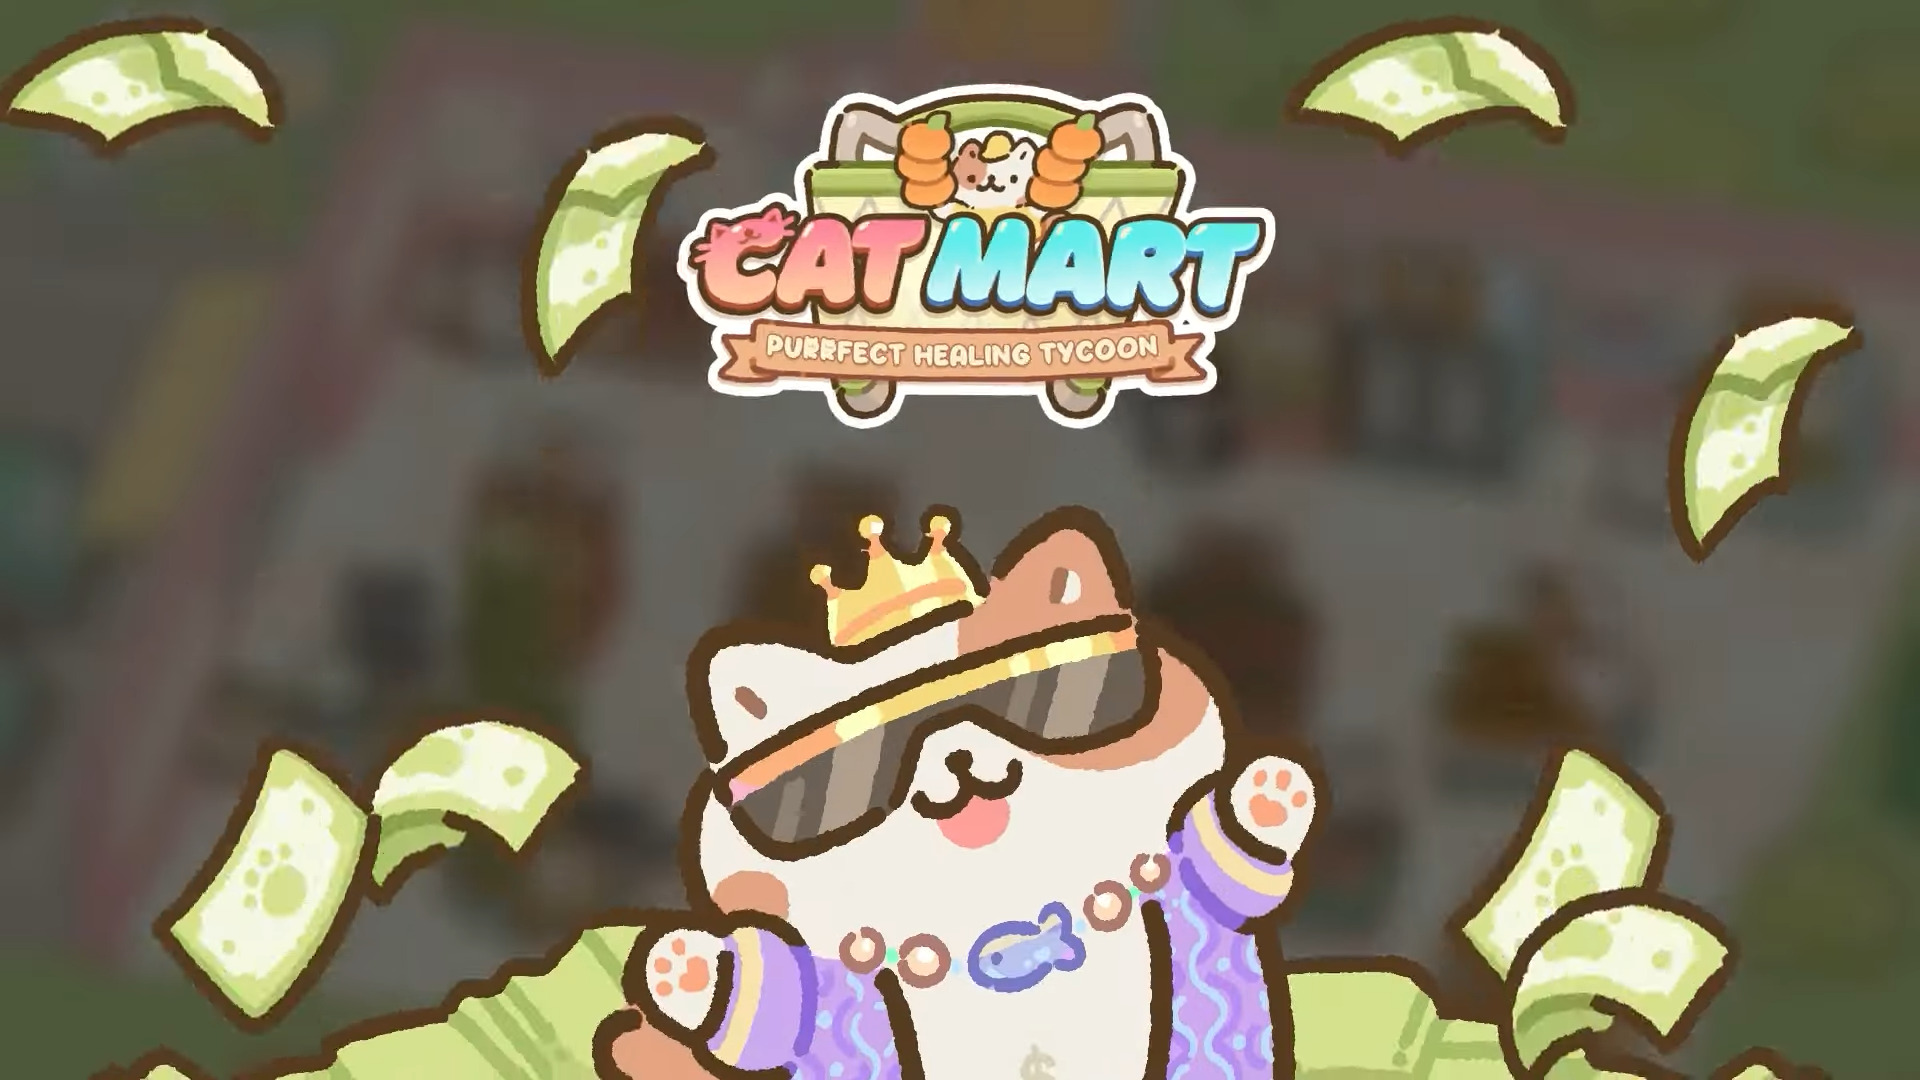 Baixar Cat Mart : Purrfect Tycoon para Android grátis.